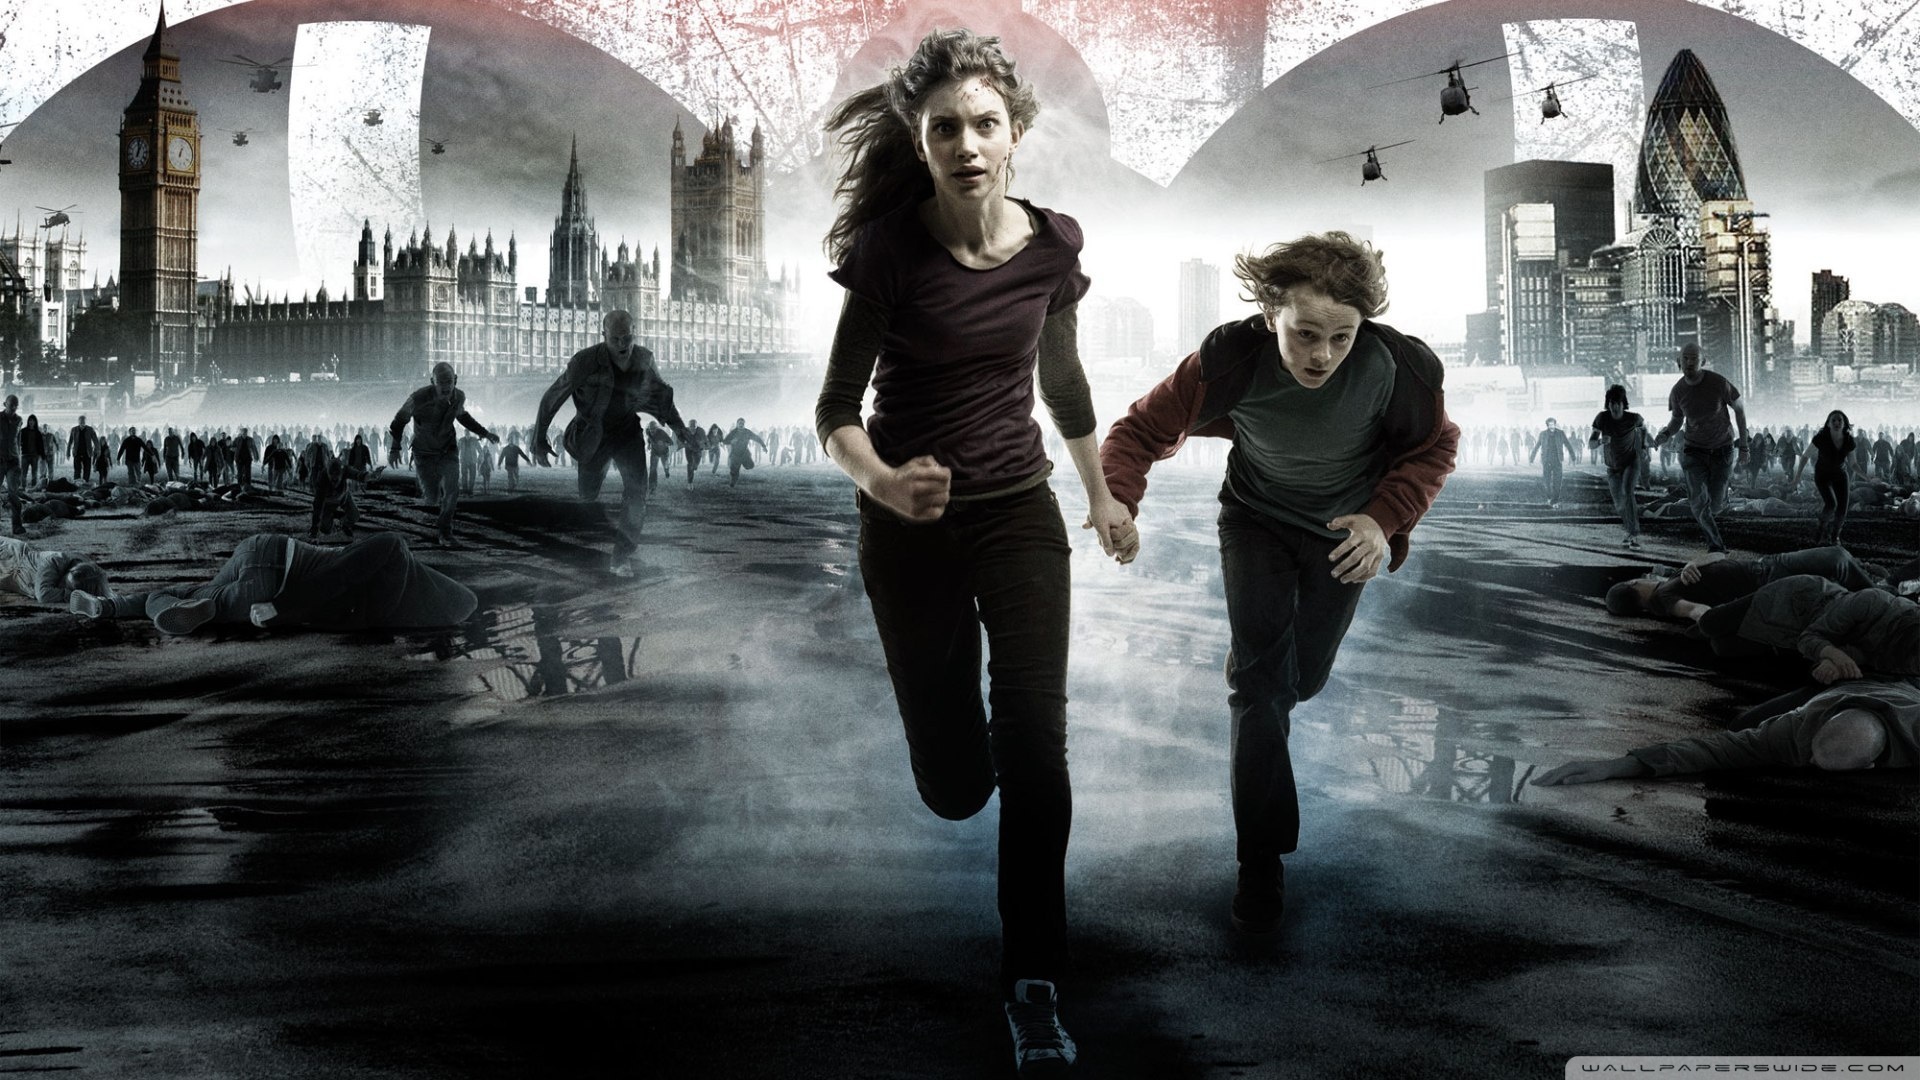 28 Weeks Later #2